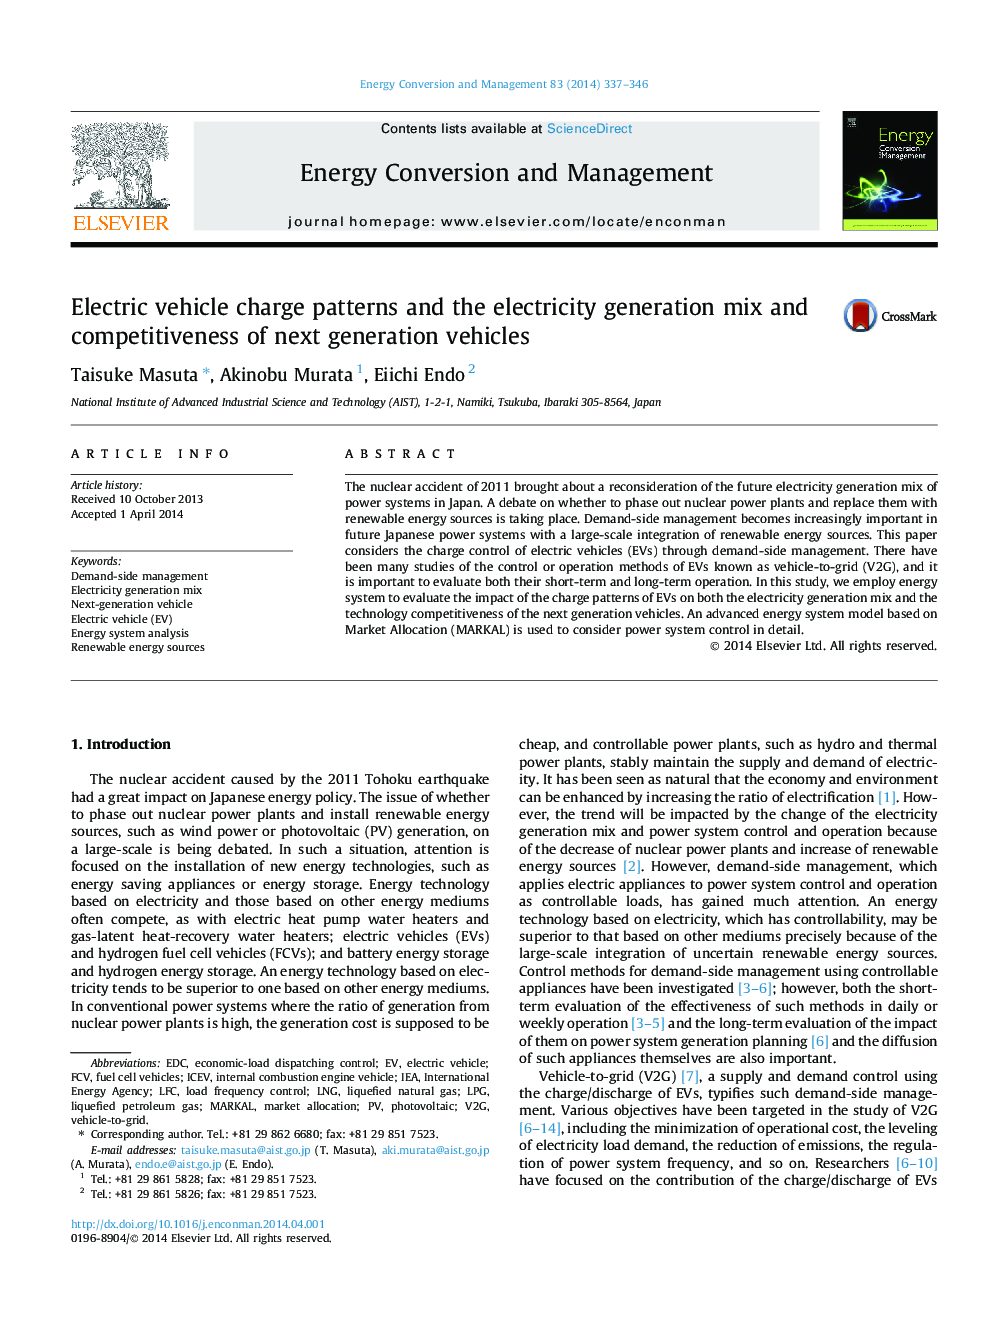 Electric vehicle charge patterns and the electricity generation mix and competitiveness of next generation vehicles